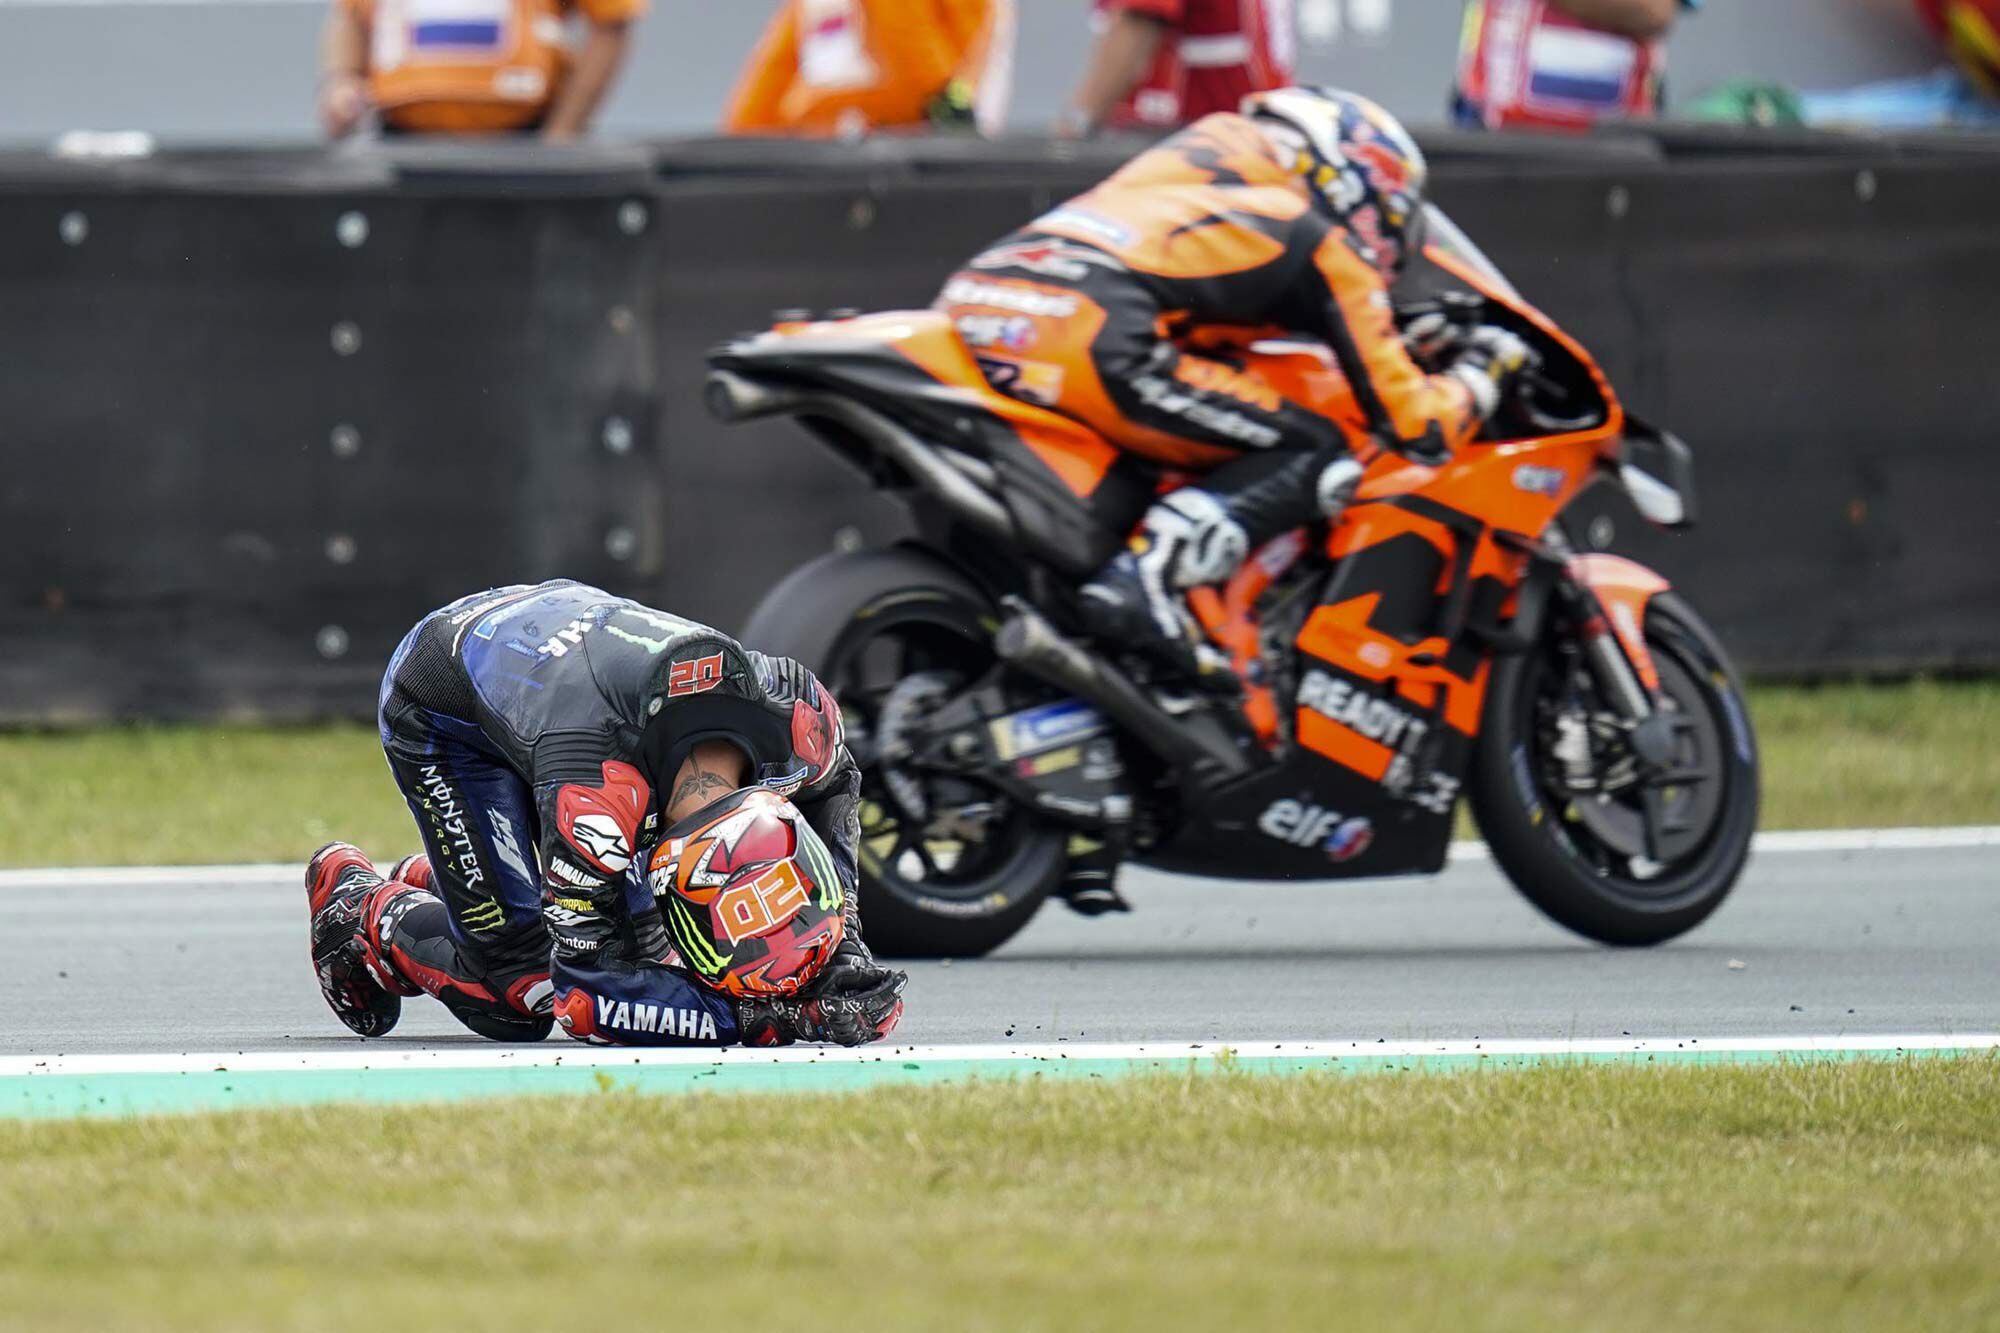 Quartarao crashed twice at Assen. The first nearly took out Espargaró, while the second, a highside, ended his day. He’s still leading in overall points, but his lead was slashed by half, and he faces a “long-lap” penalty at Silverstone.